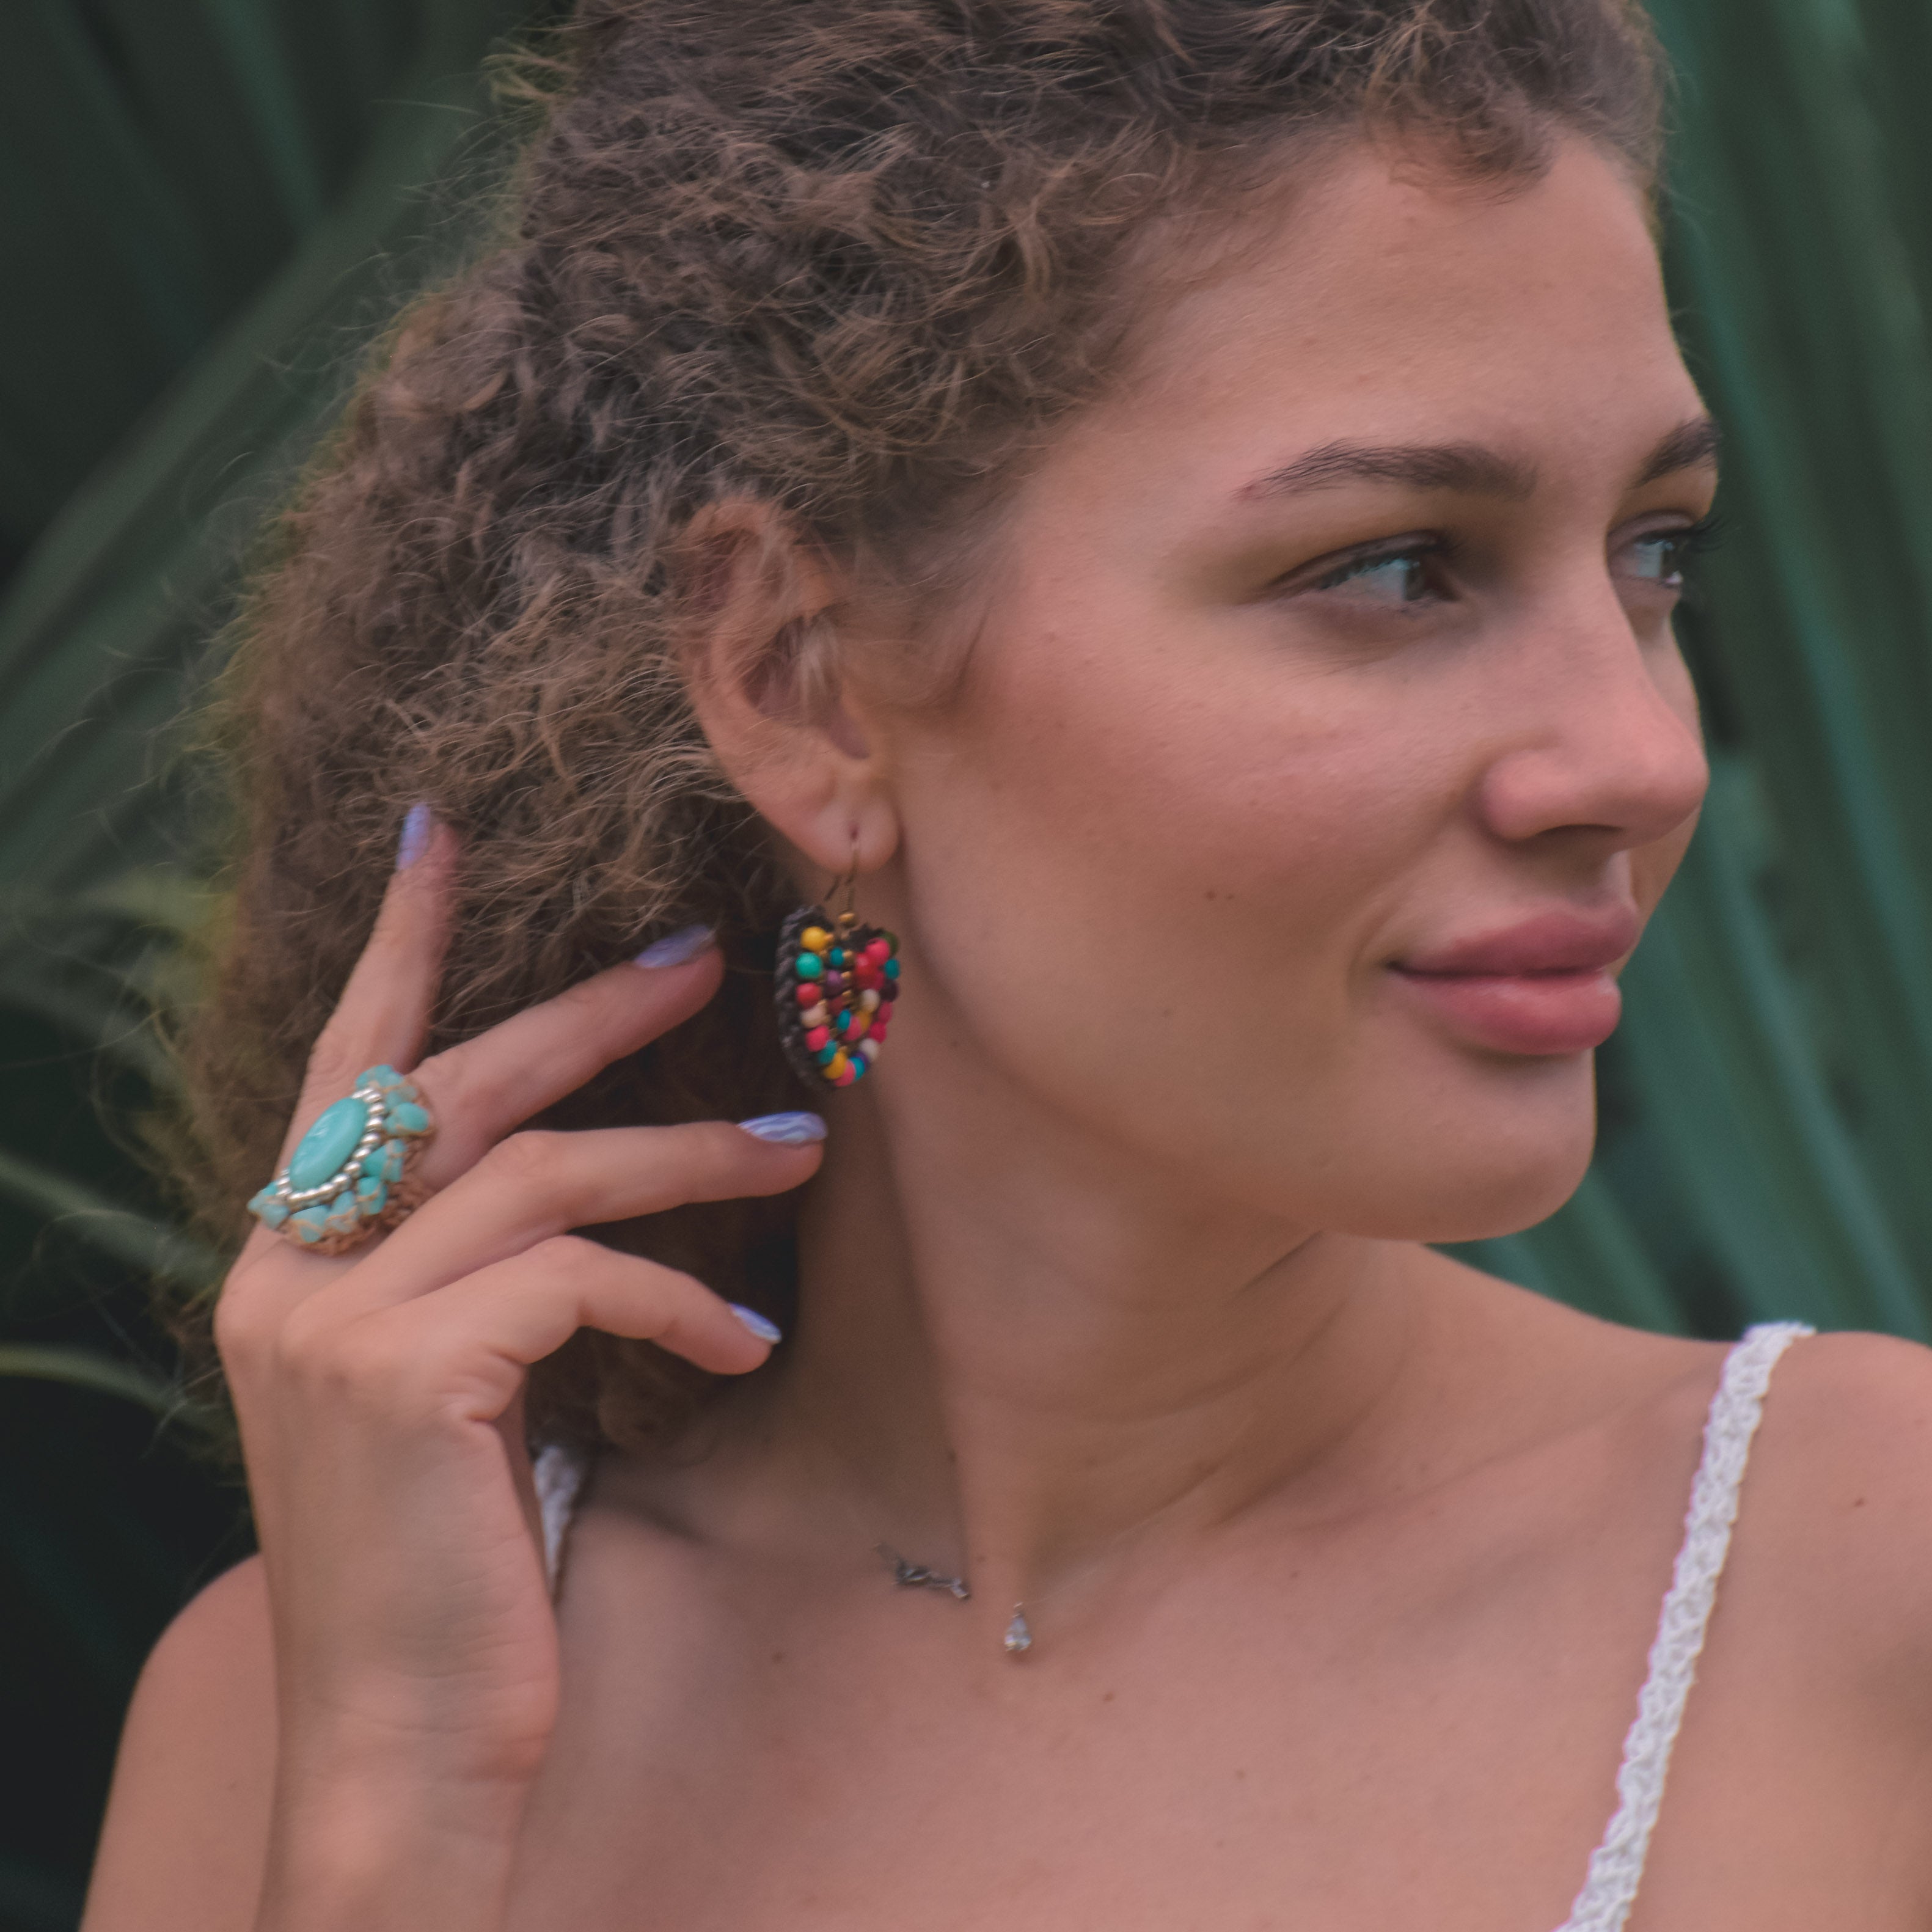 ZEN EARRINGS Elepanta Earrings - Buy Today Elephant Pants Jewelry And Bohemian Clothes Handmade In Thailand Help To Save The Elephants FairTrade And Vegan